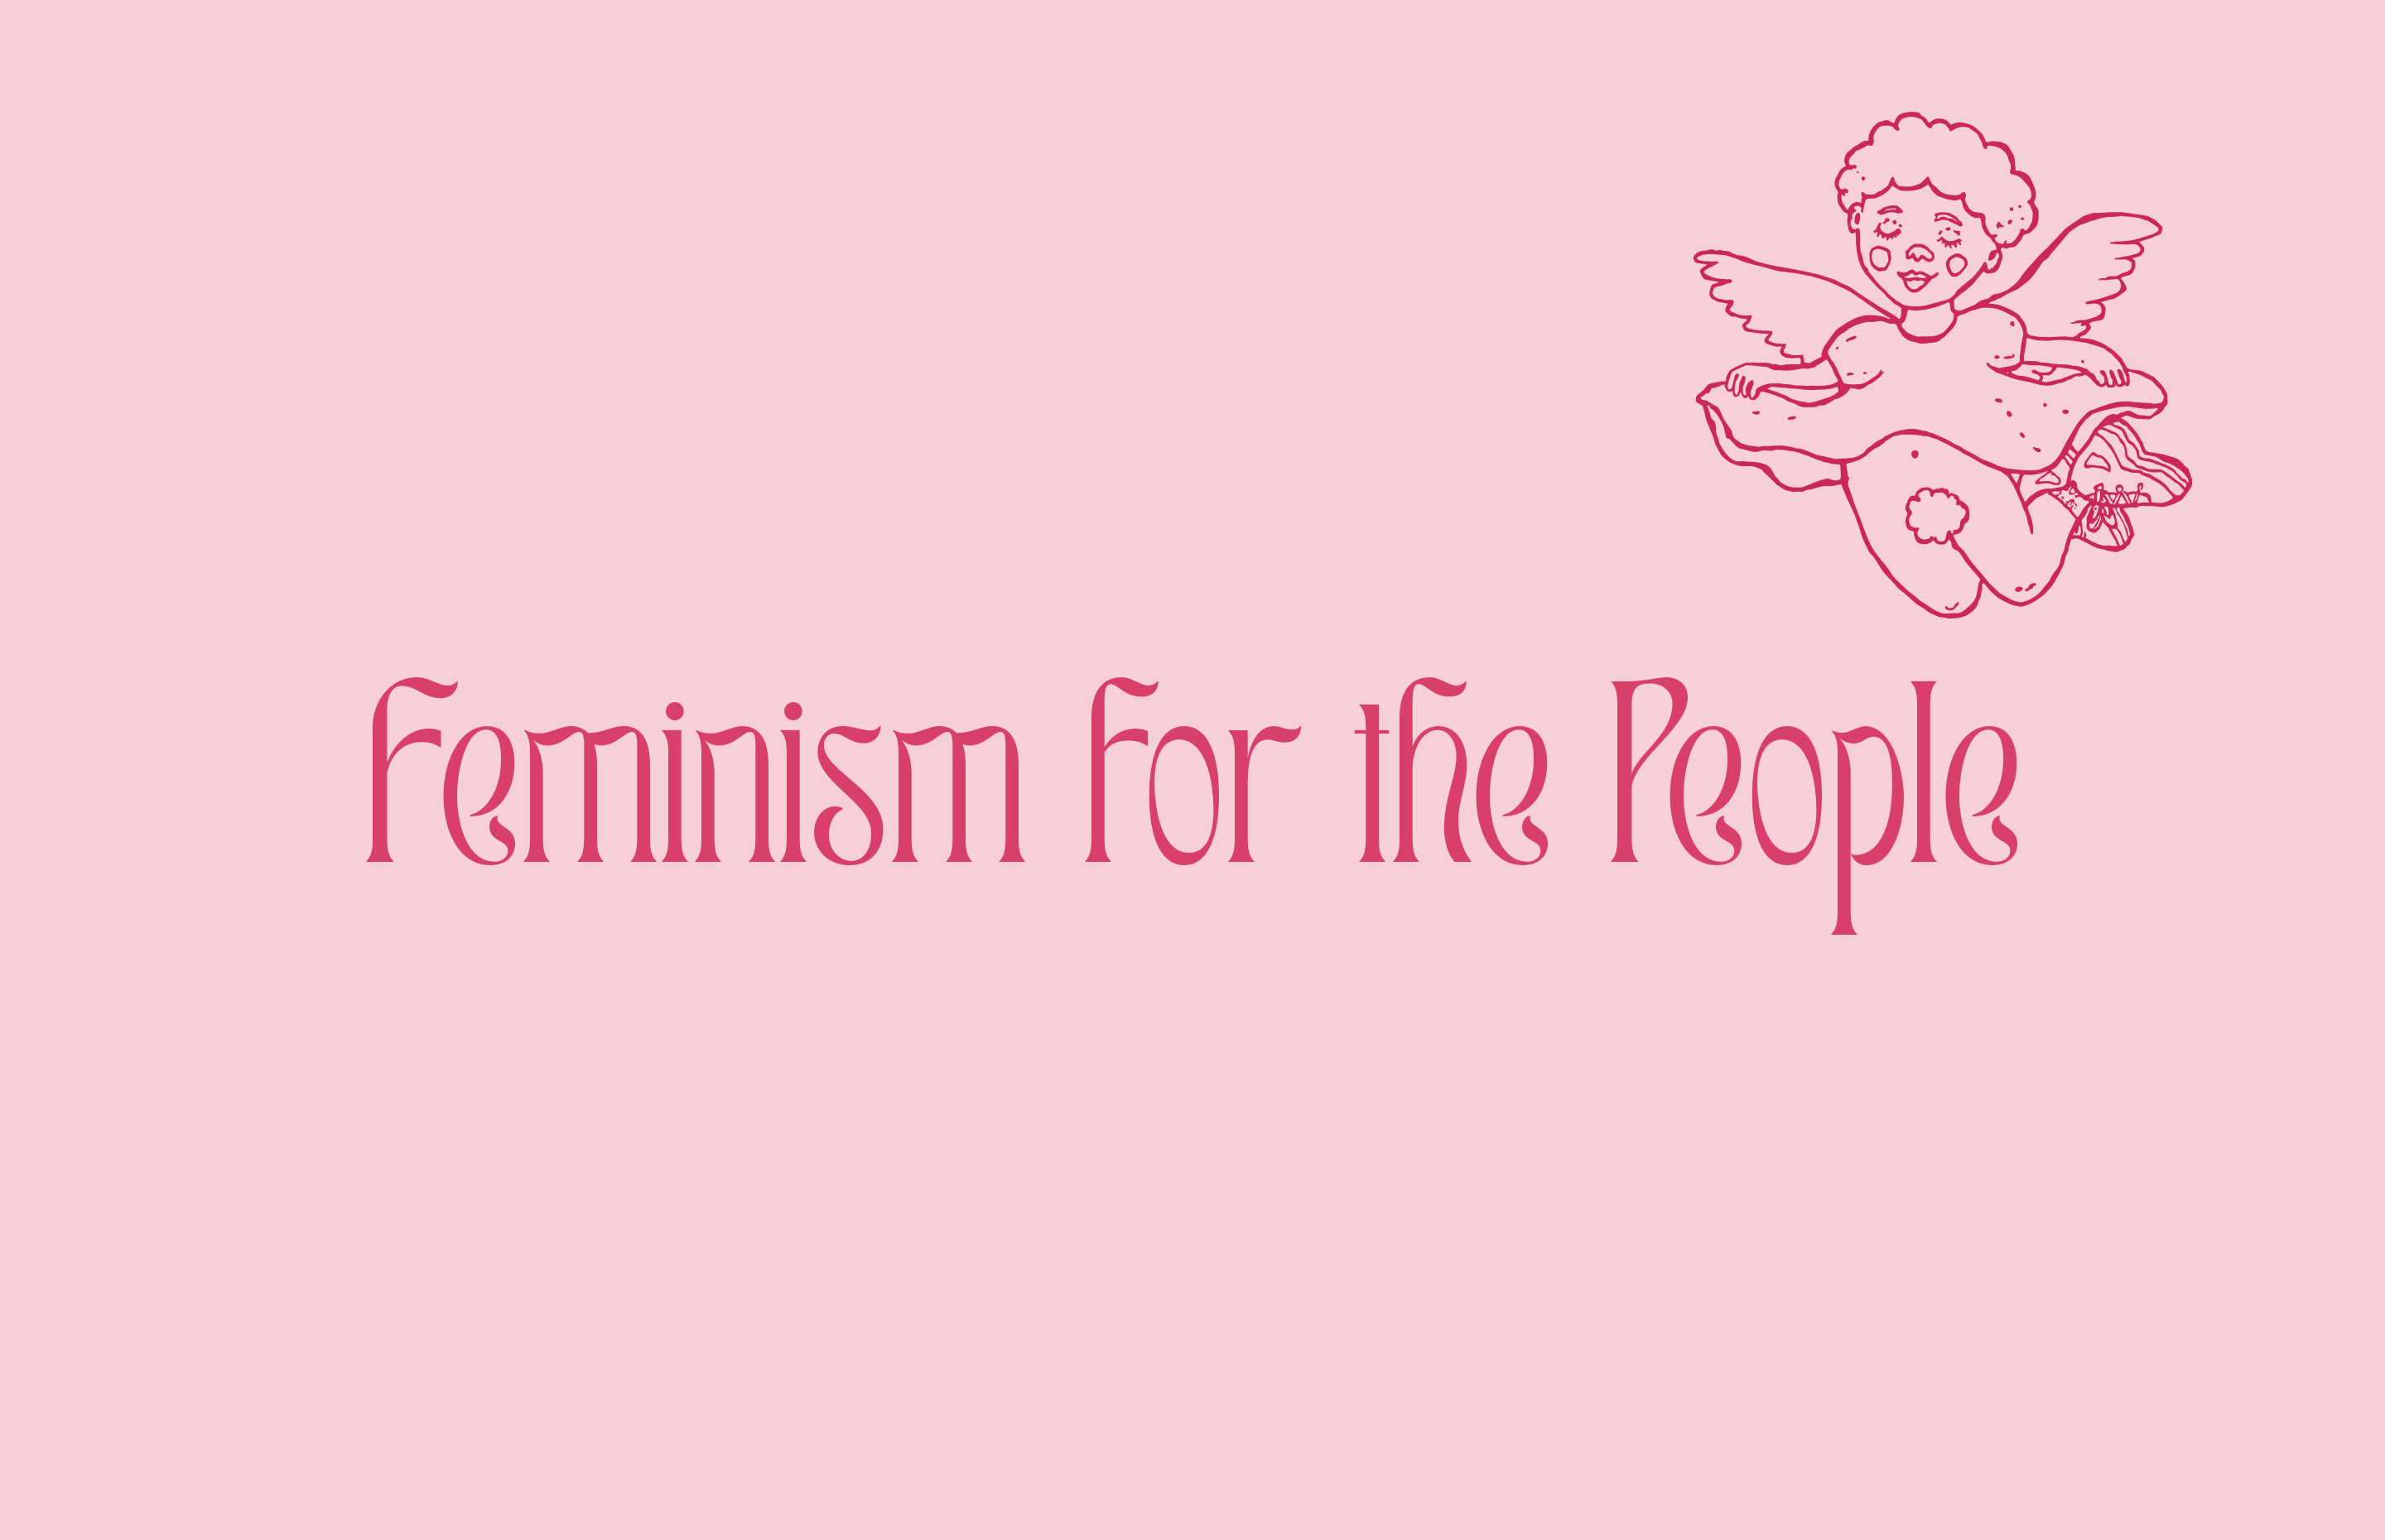 Feminism for the People